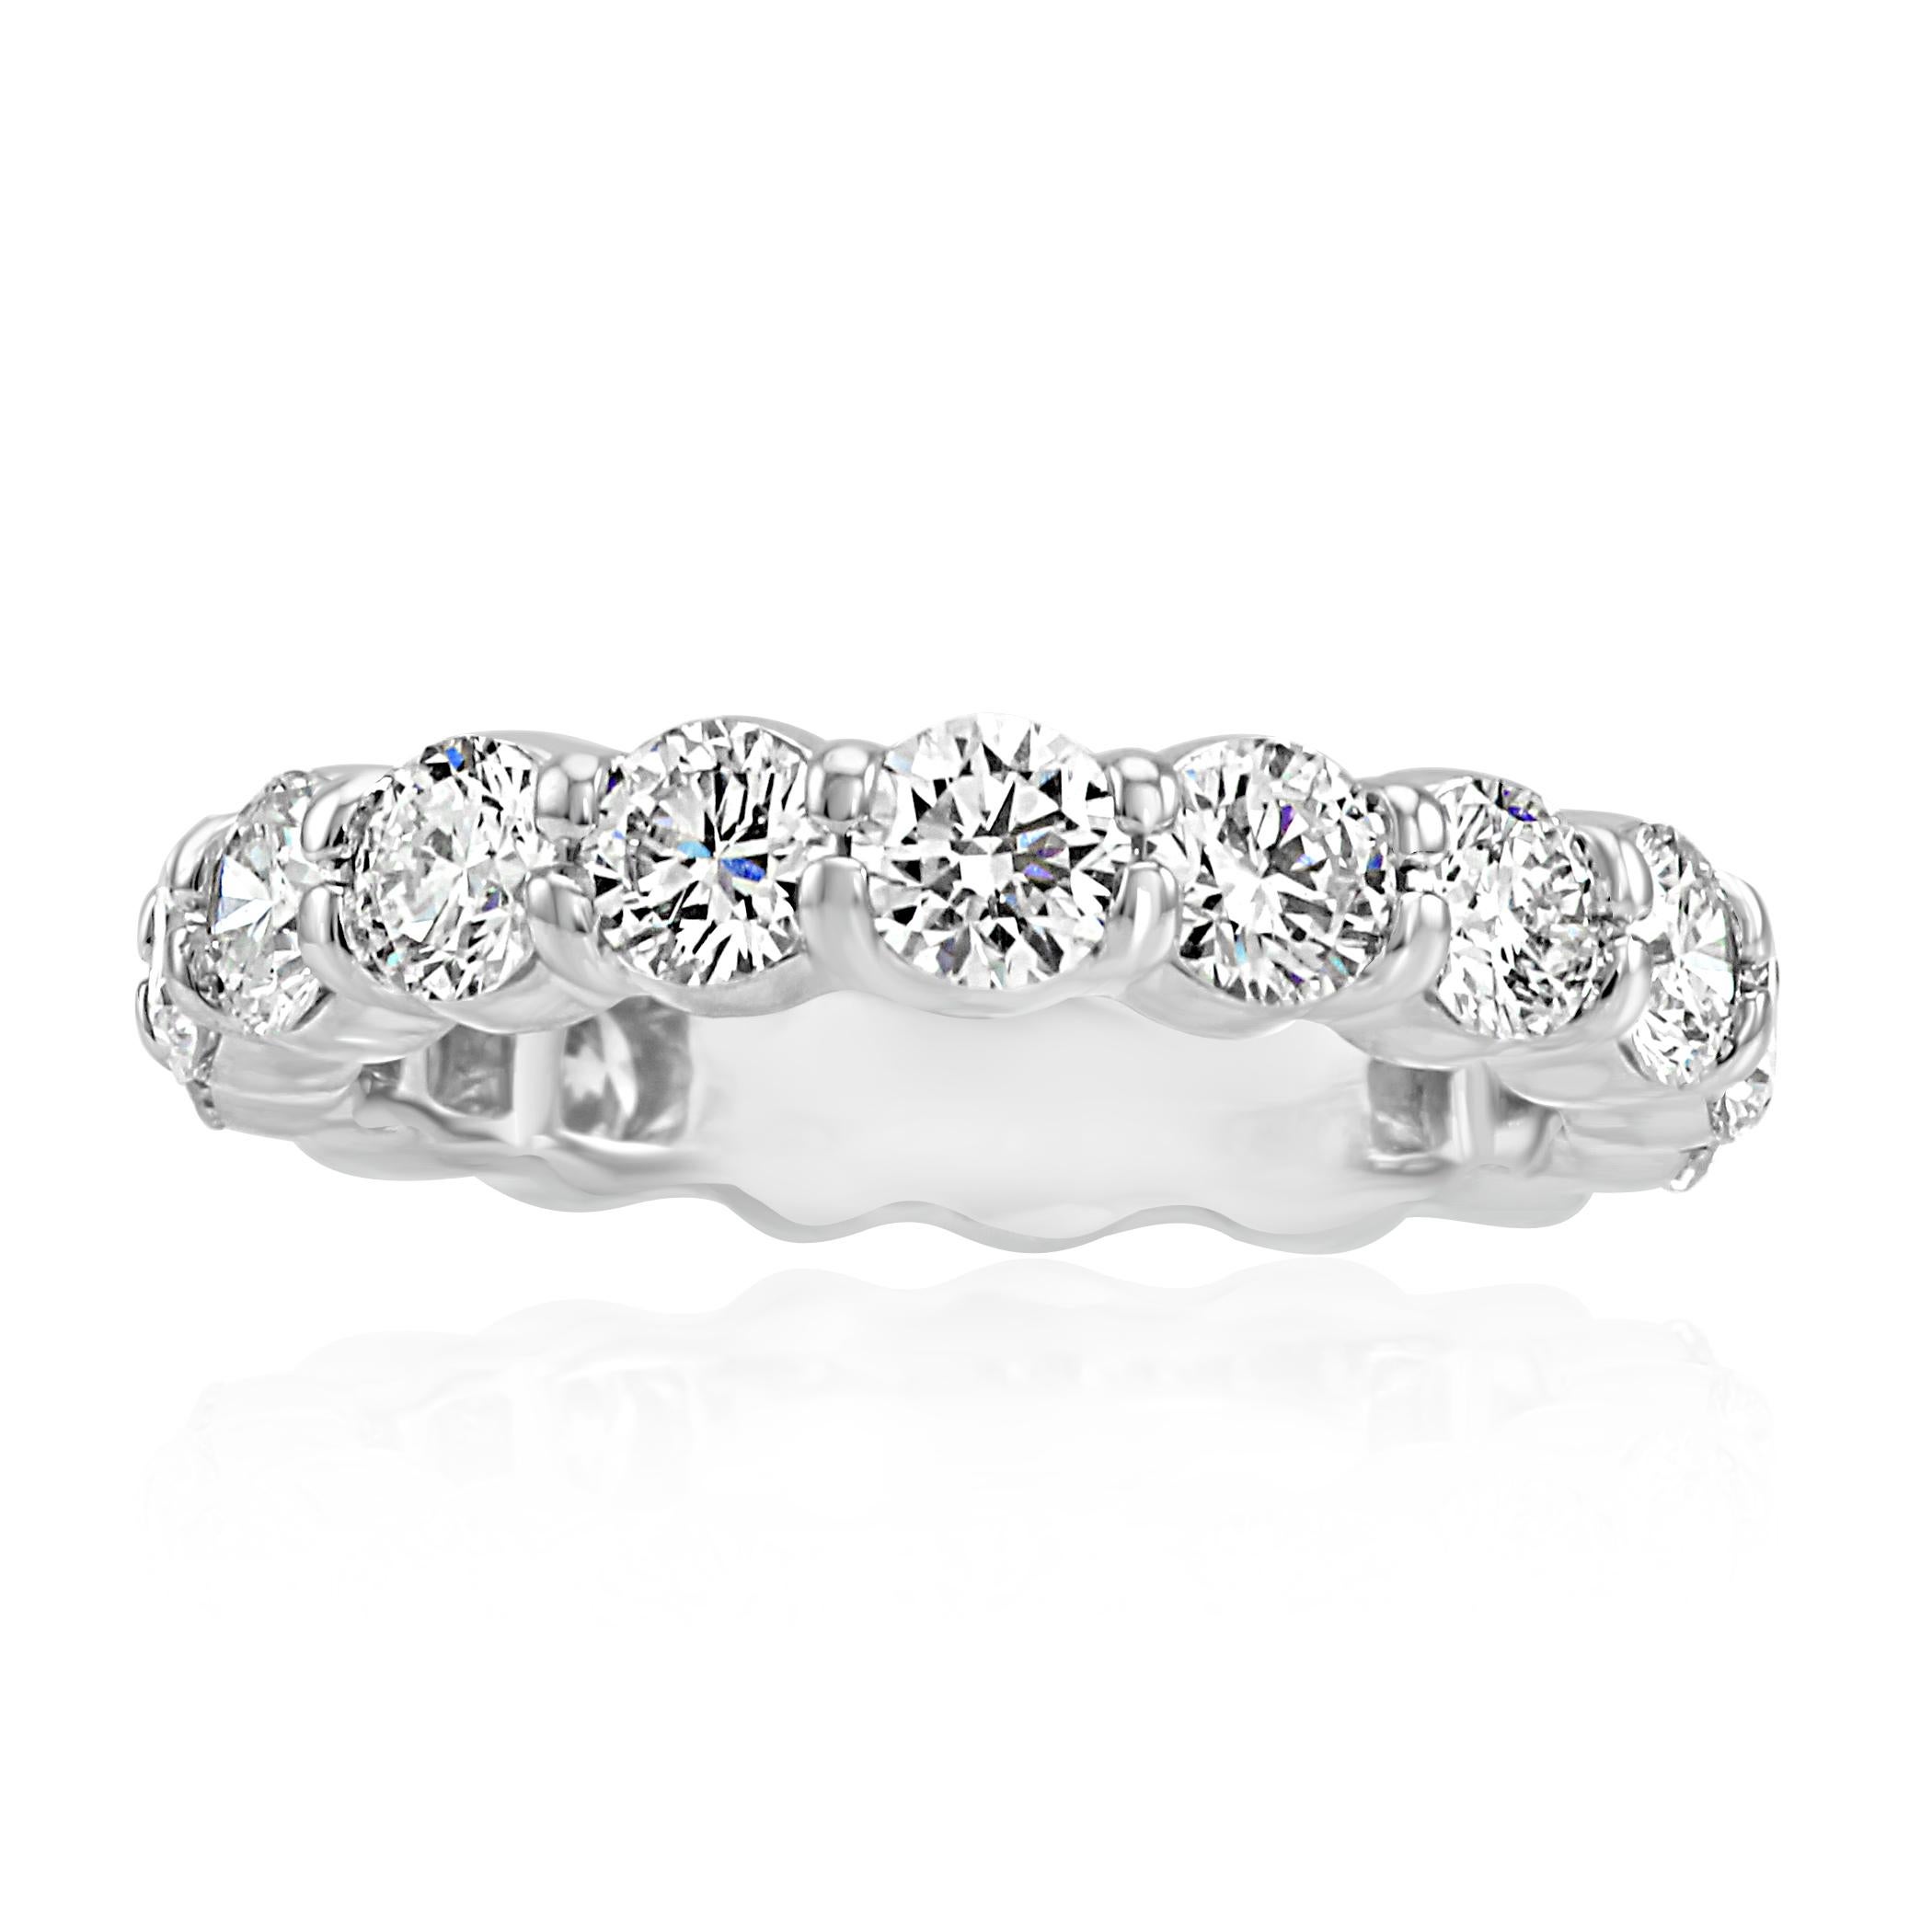 White Diamond Rounds G-H Color VS clarity 3.00 Carat in Gorgeous Platinum Eternity Wedding Band Ring.

Style available in different price ranges. Prices are based on your selection of 4C's i.e Cut, Color, Carat, Clarity. Please contact us for more